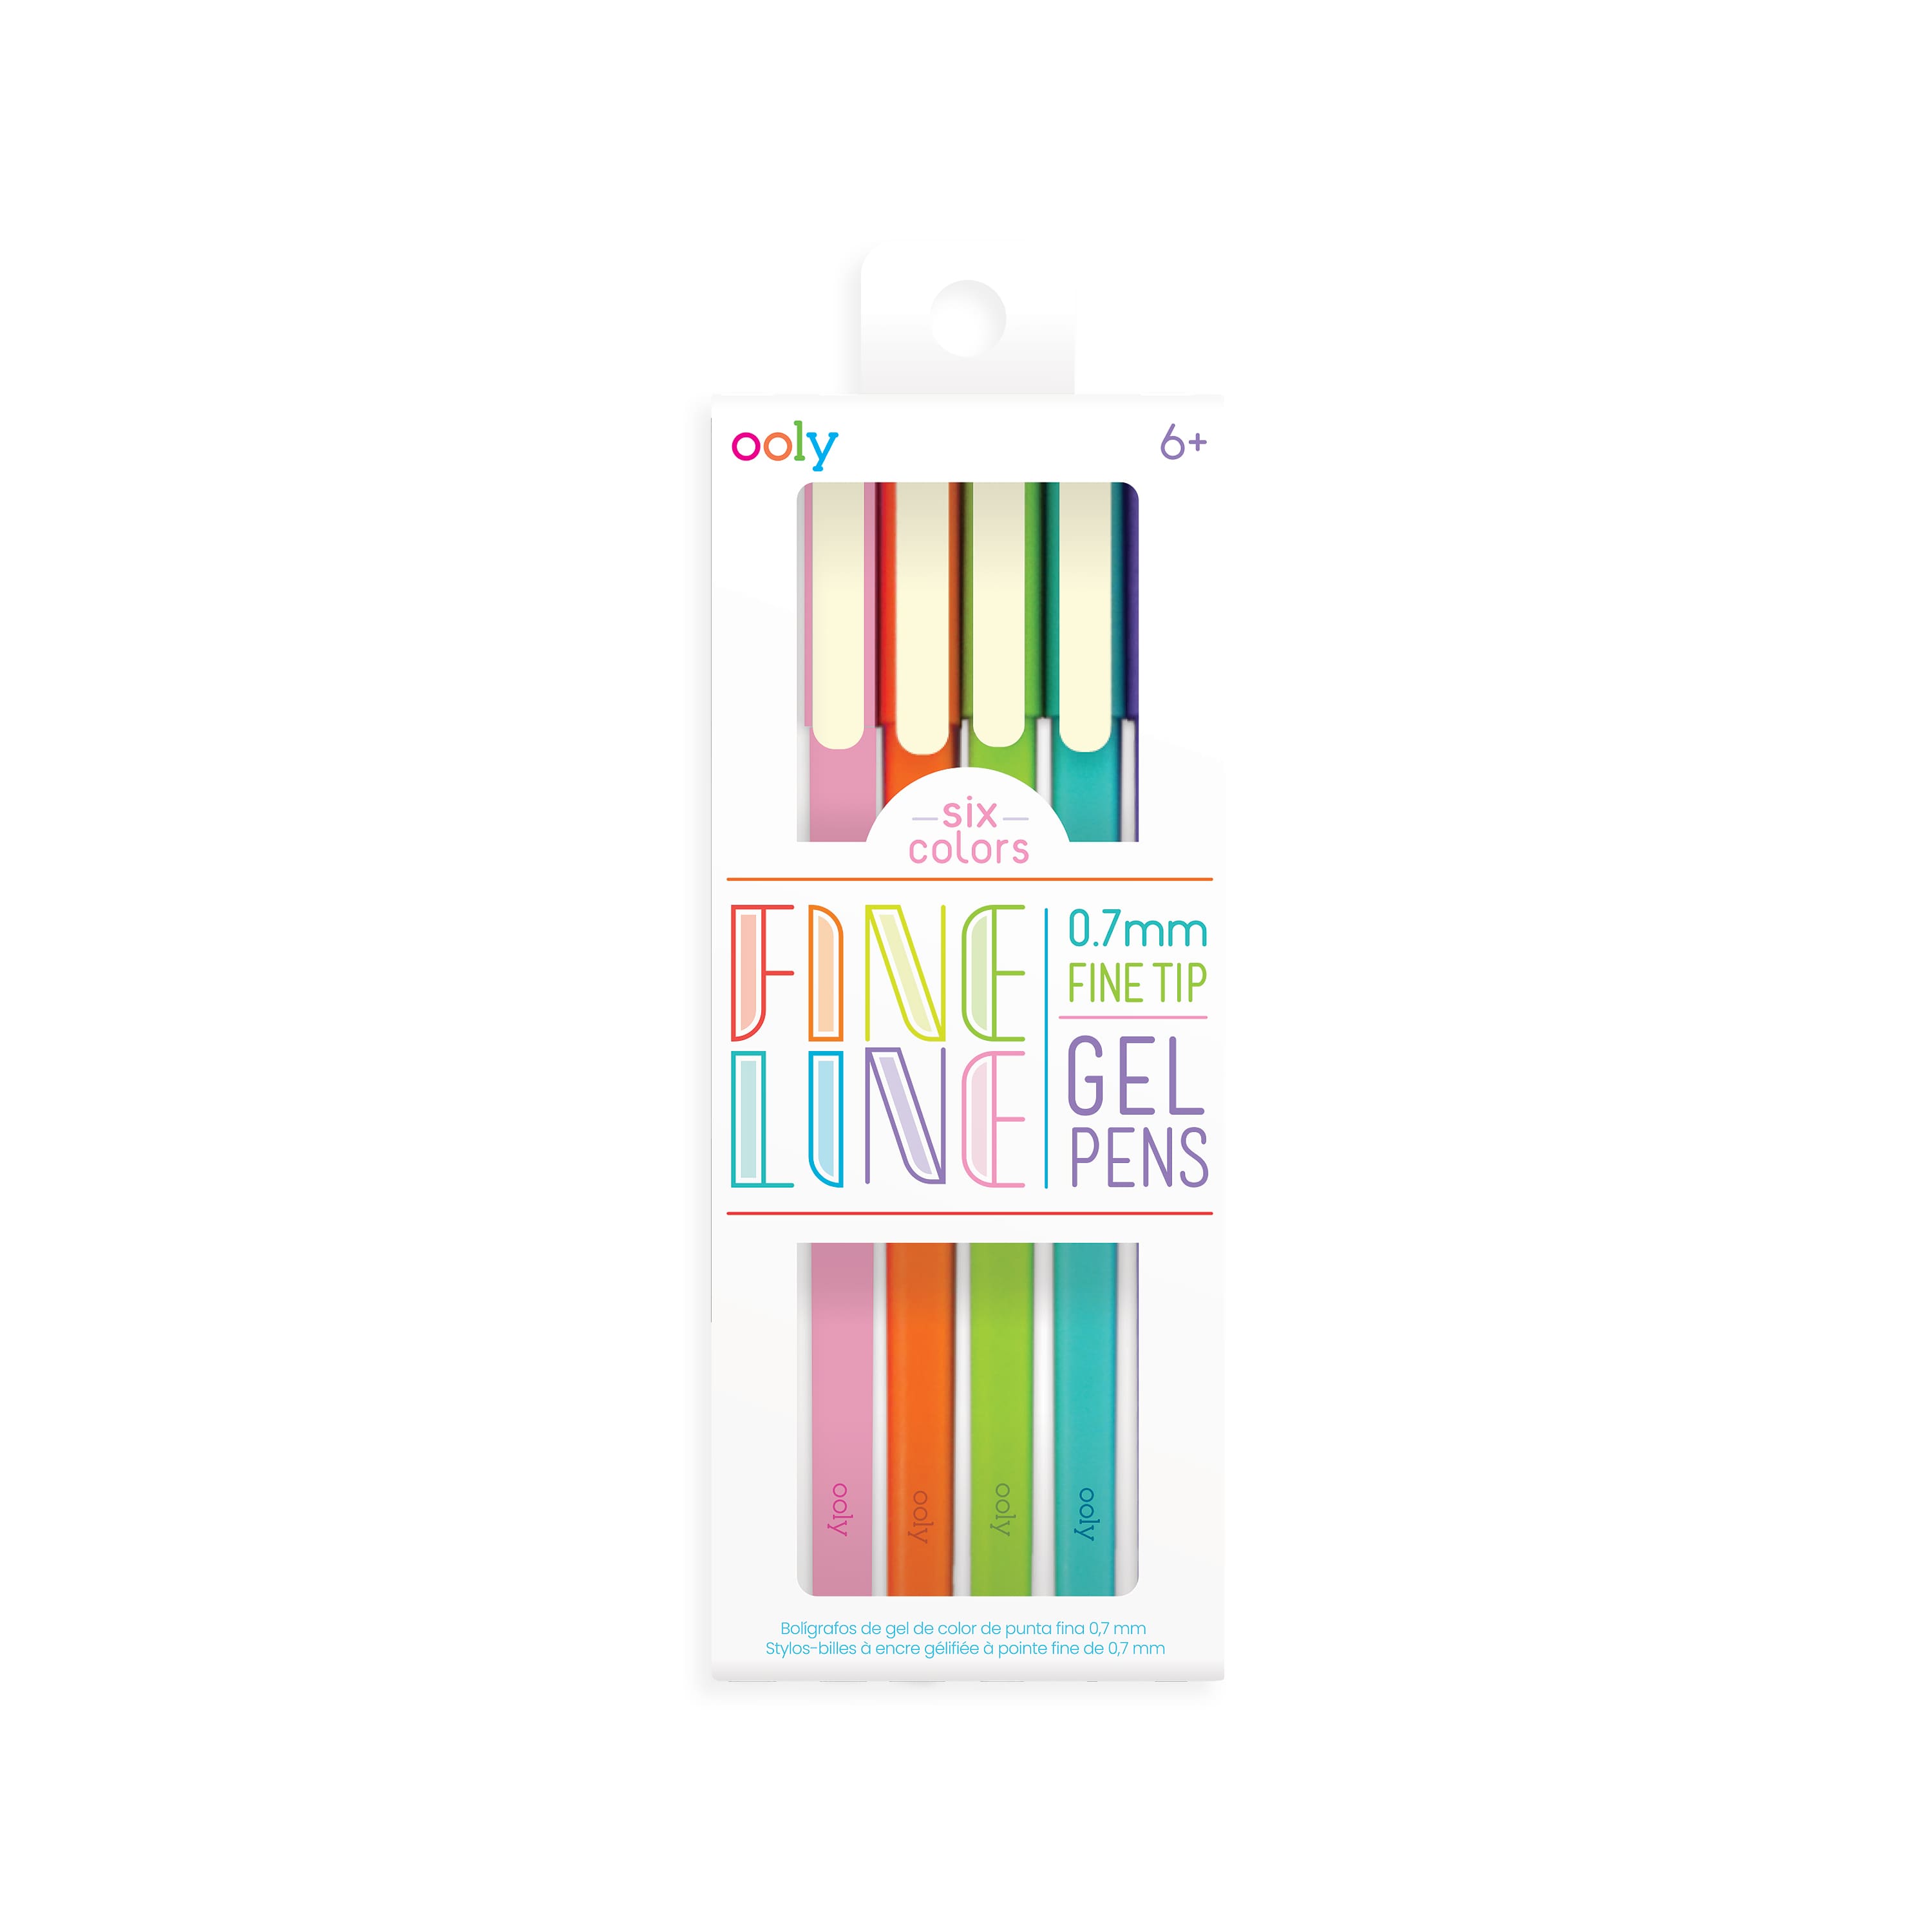 Ooly Petite Point Fine Tip Gel Pens - The Fun Company